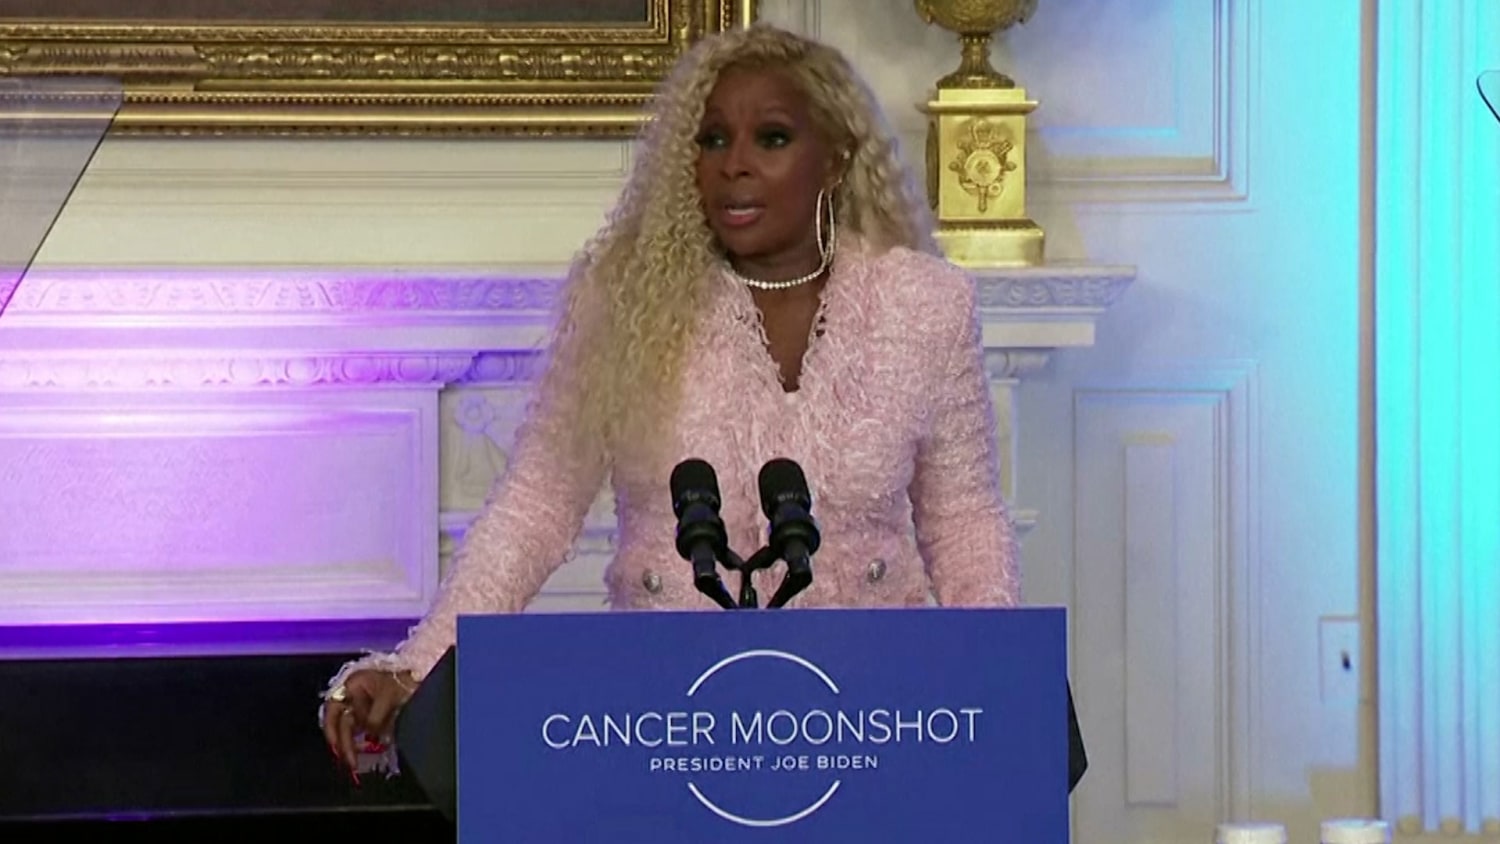 Mary J. Blige teams up with Jill Biden to support cancer research